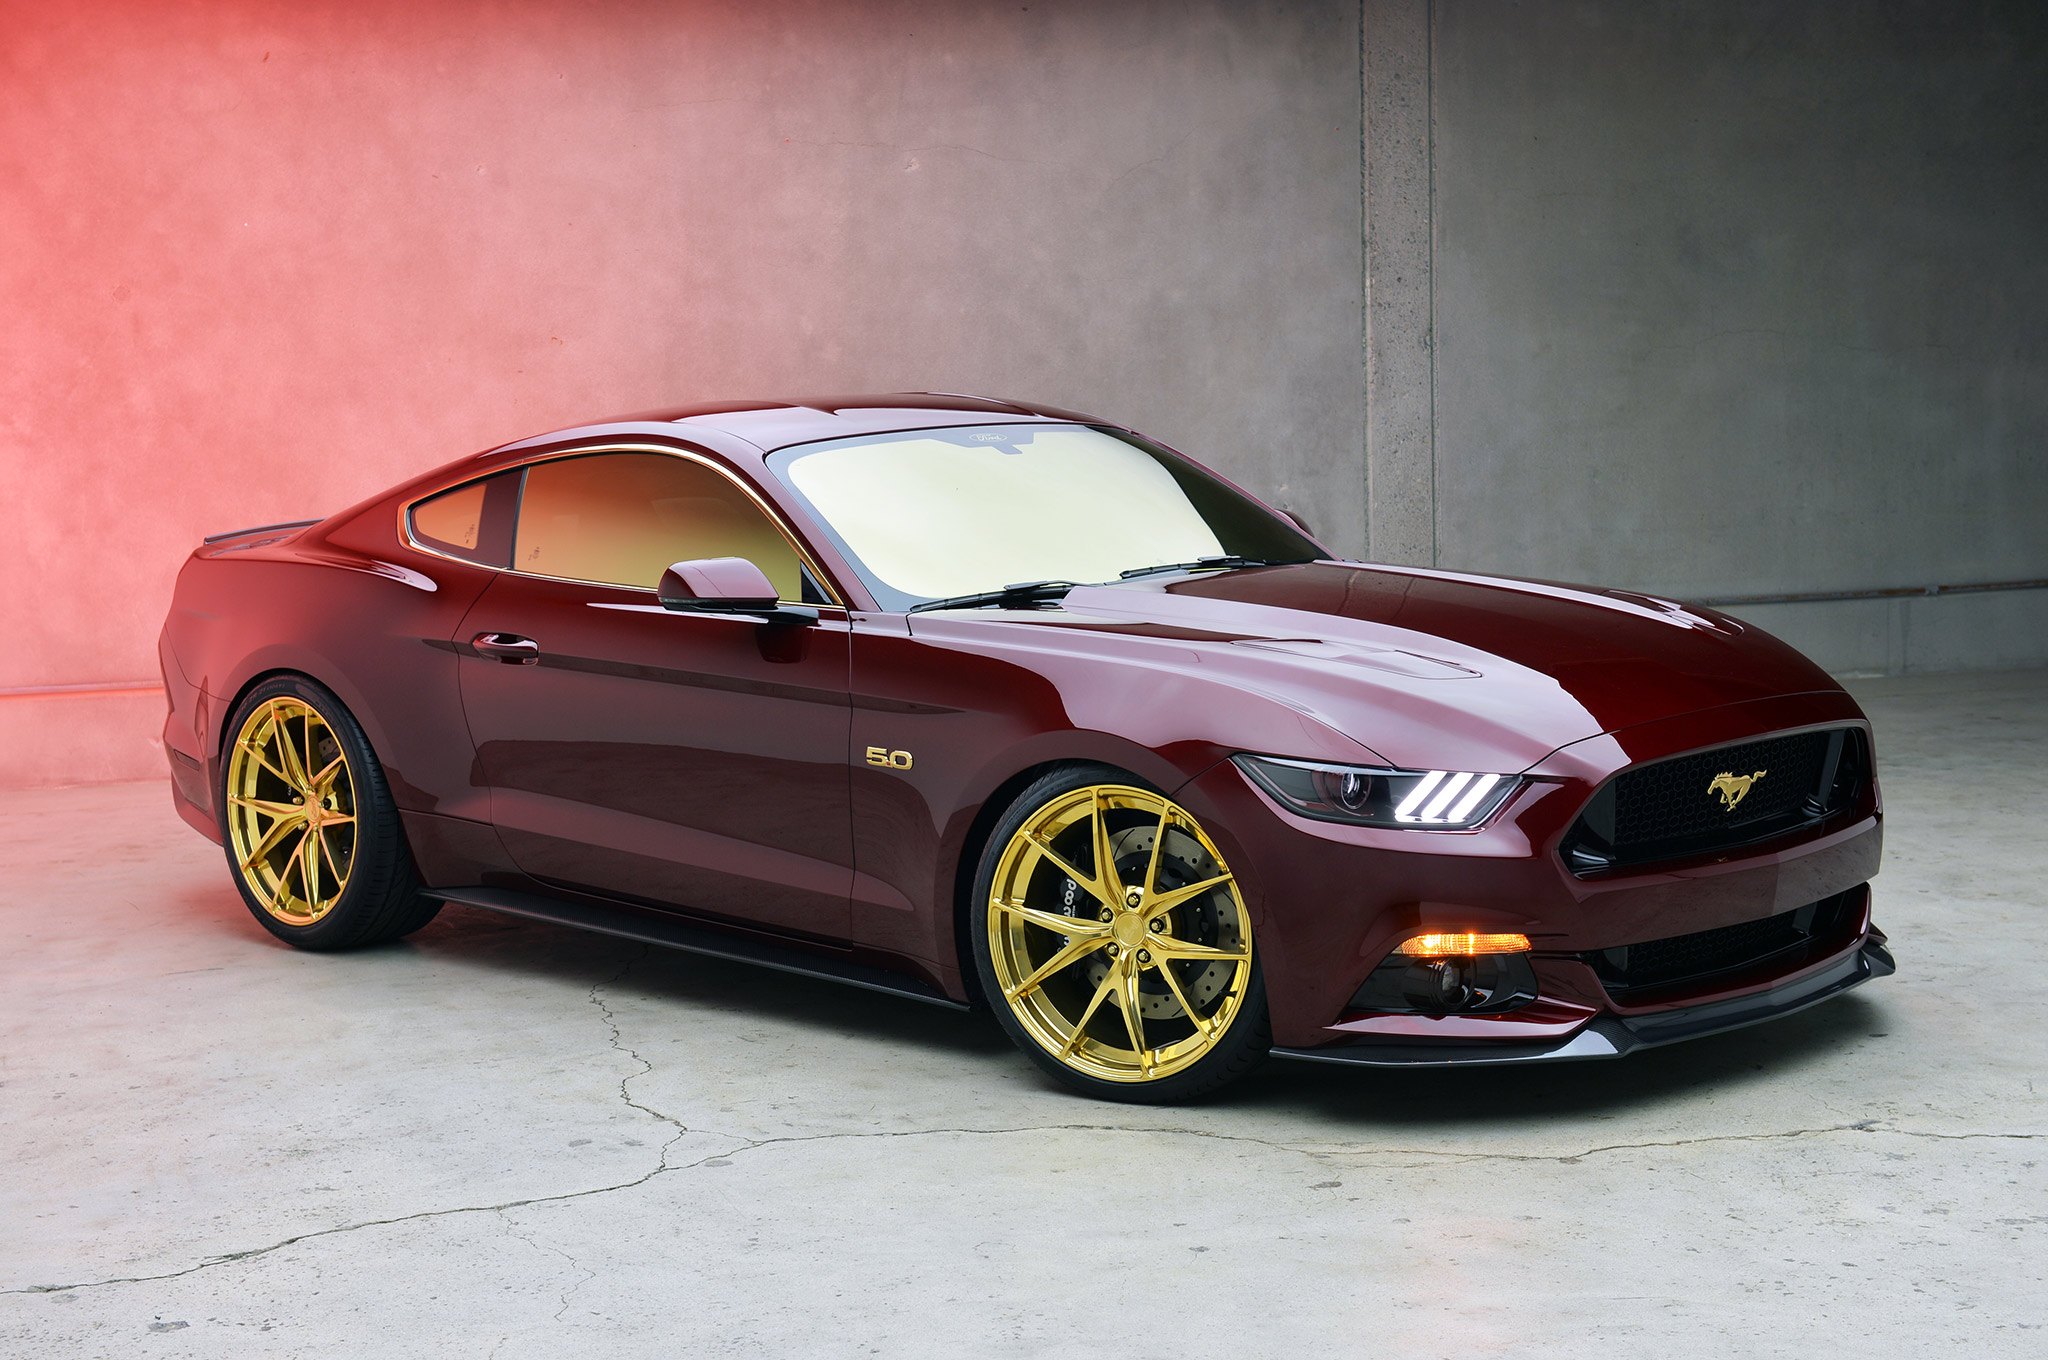 Awesome Looking Whipple Supercharged Mustang GT 5.0 - Photo by MAD Industries